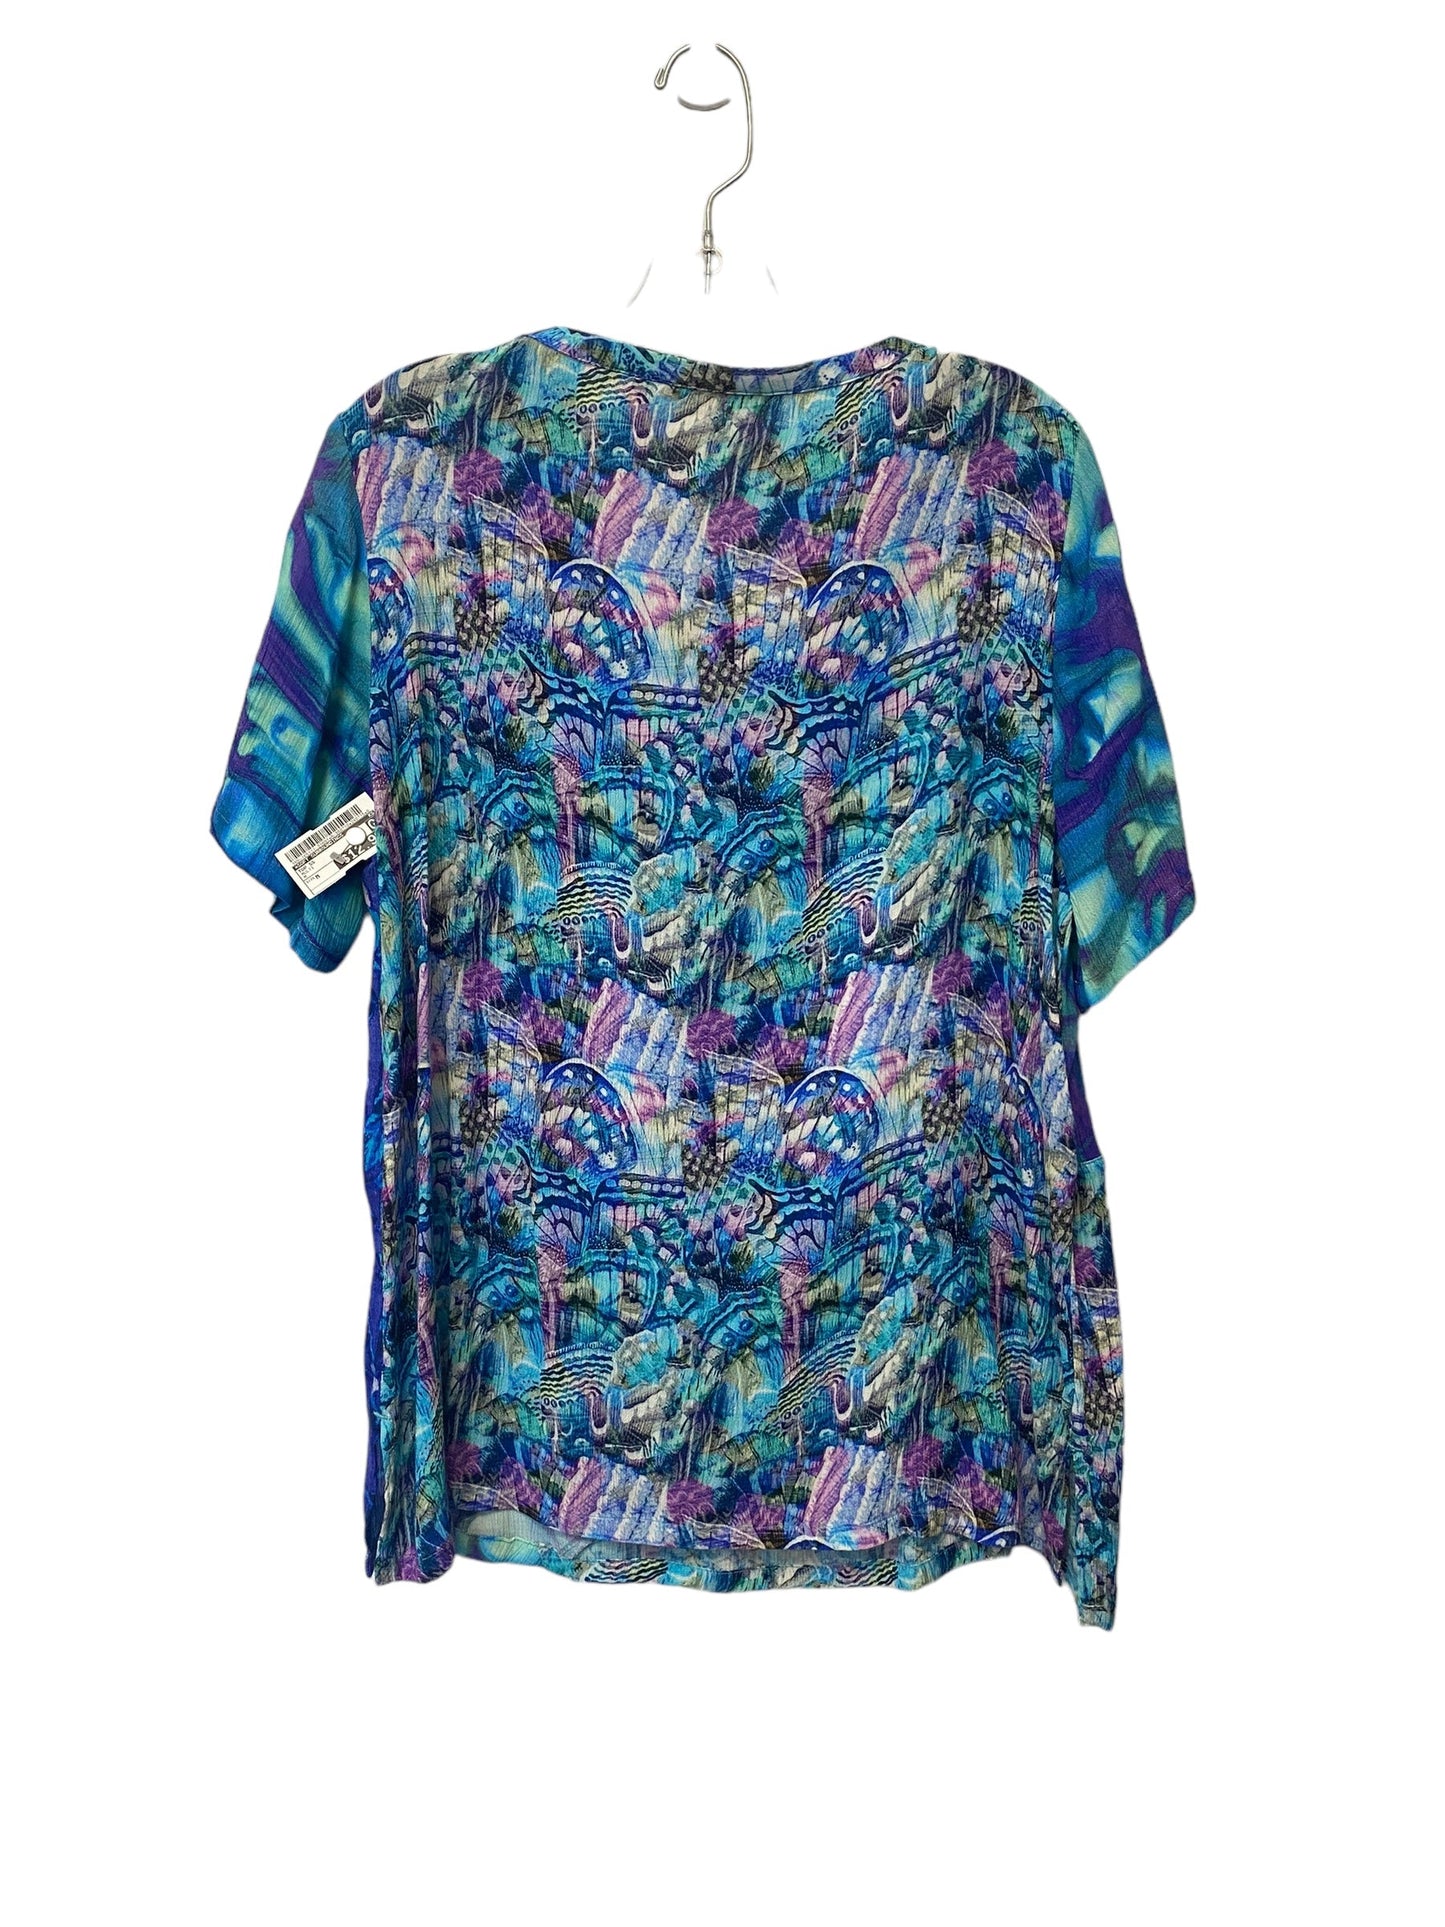 Multi-colored Top Short Sleeve Soft Surroundings, Size M